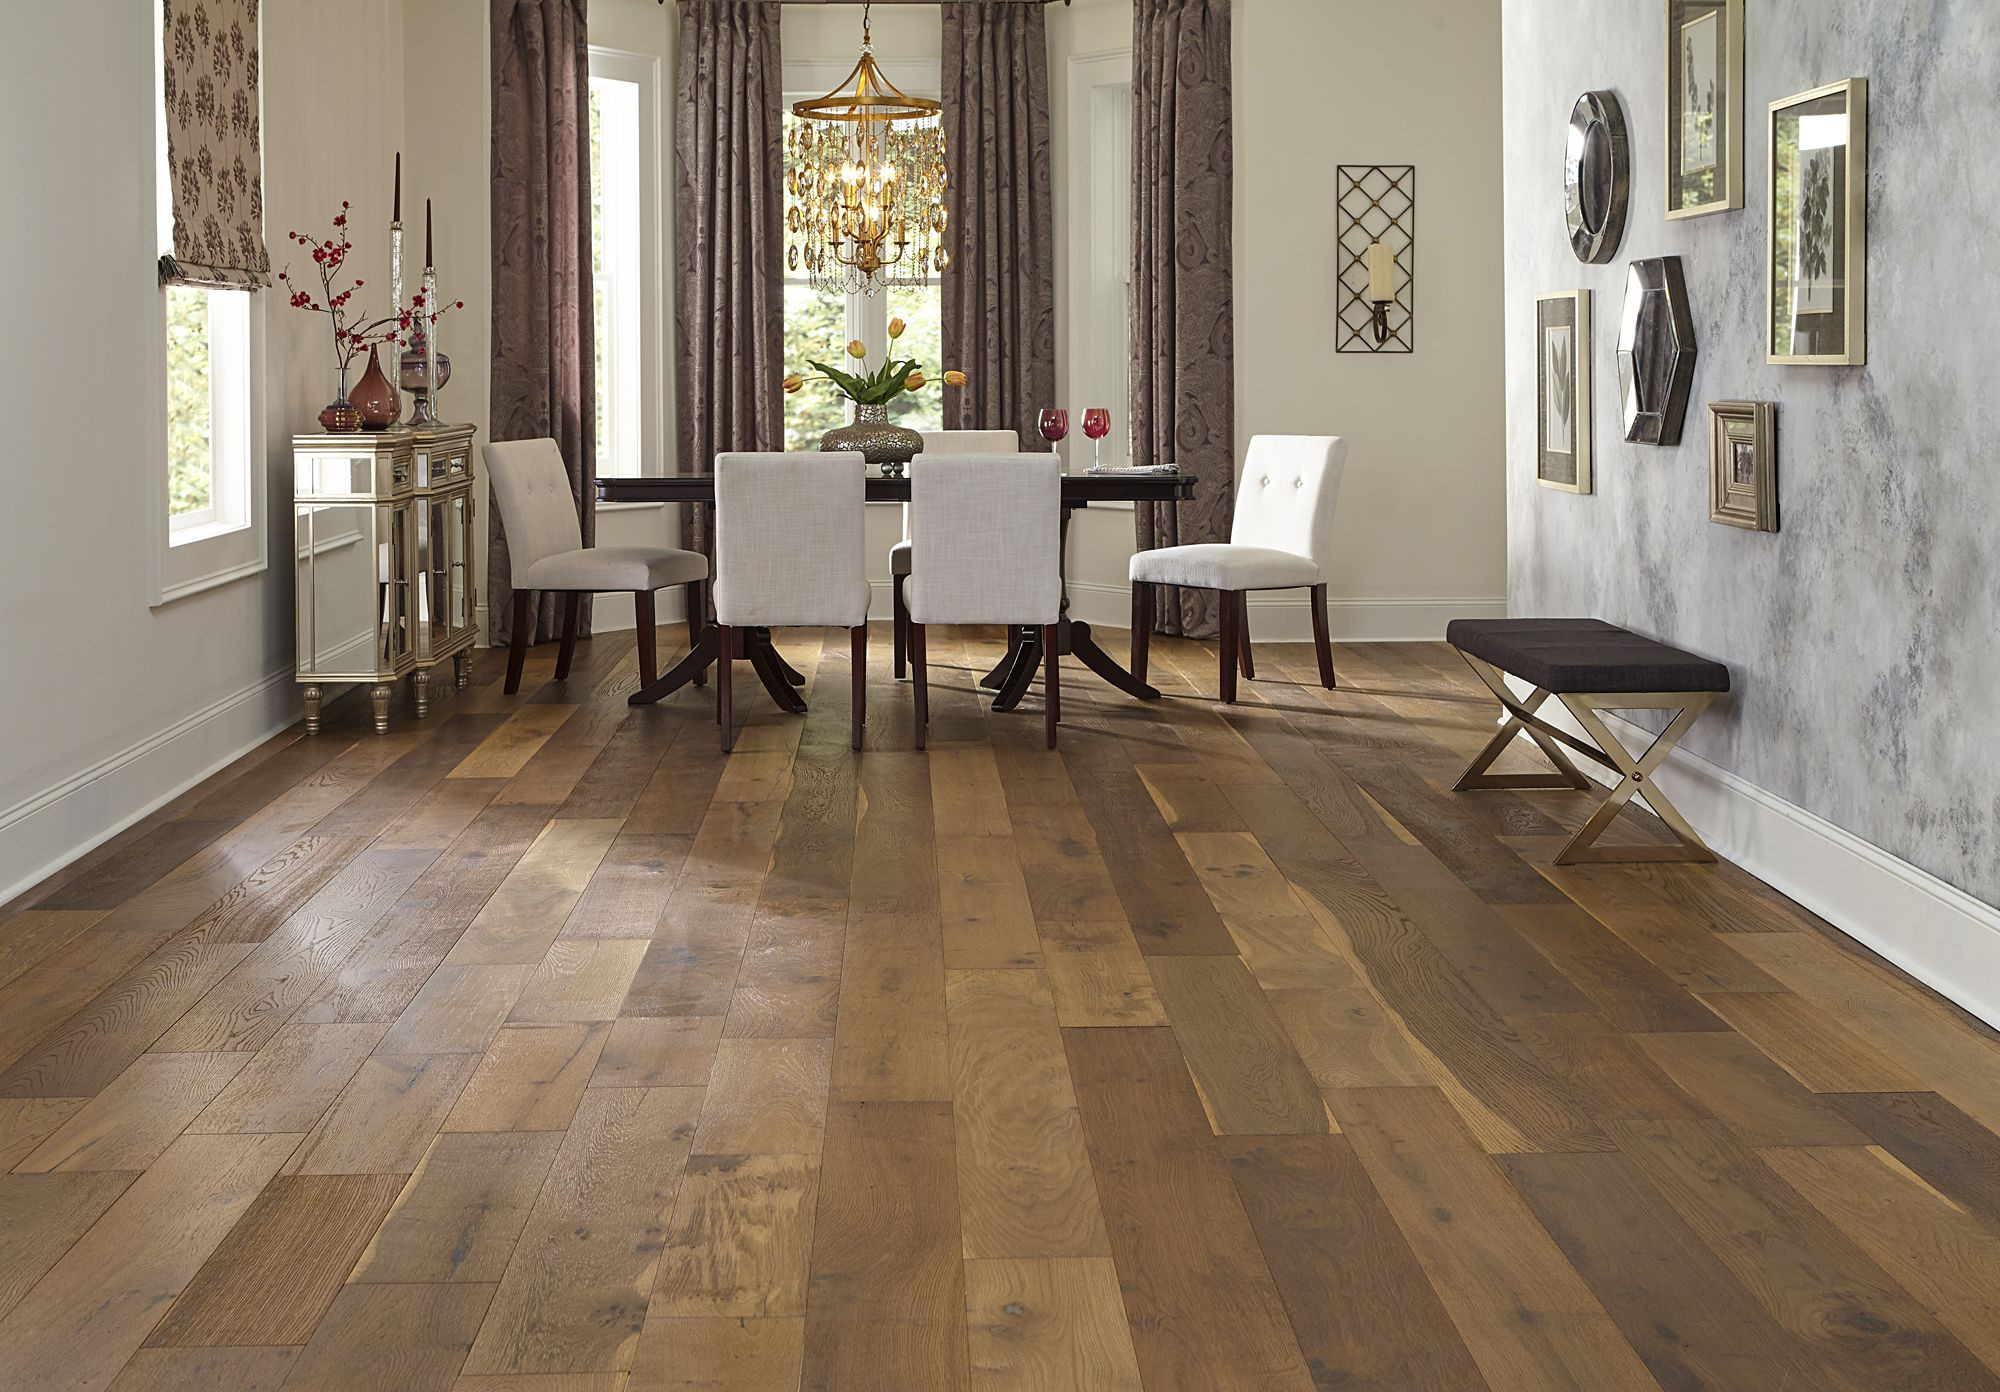 28 Trendy Engineered Hardwood Flooring Vs Hardwood Cost 2024 free download engineered hardwood flooring vs hardwood cost of 7 1 2 wide planks and a rustic look bellawood willow manor oak has intended for 7 1 2 wide planks and a rustic look bellawood willow manor oa